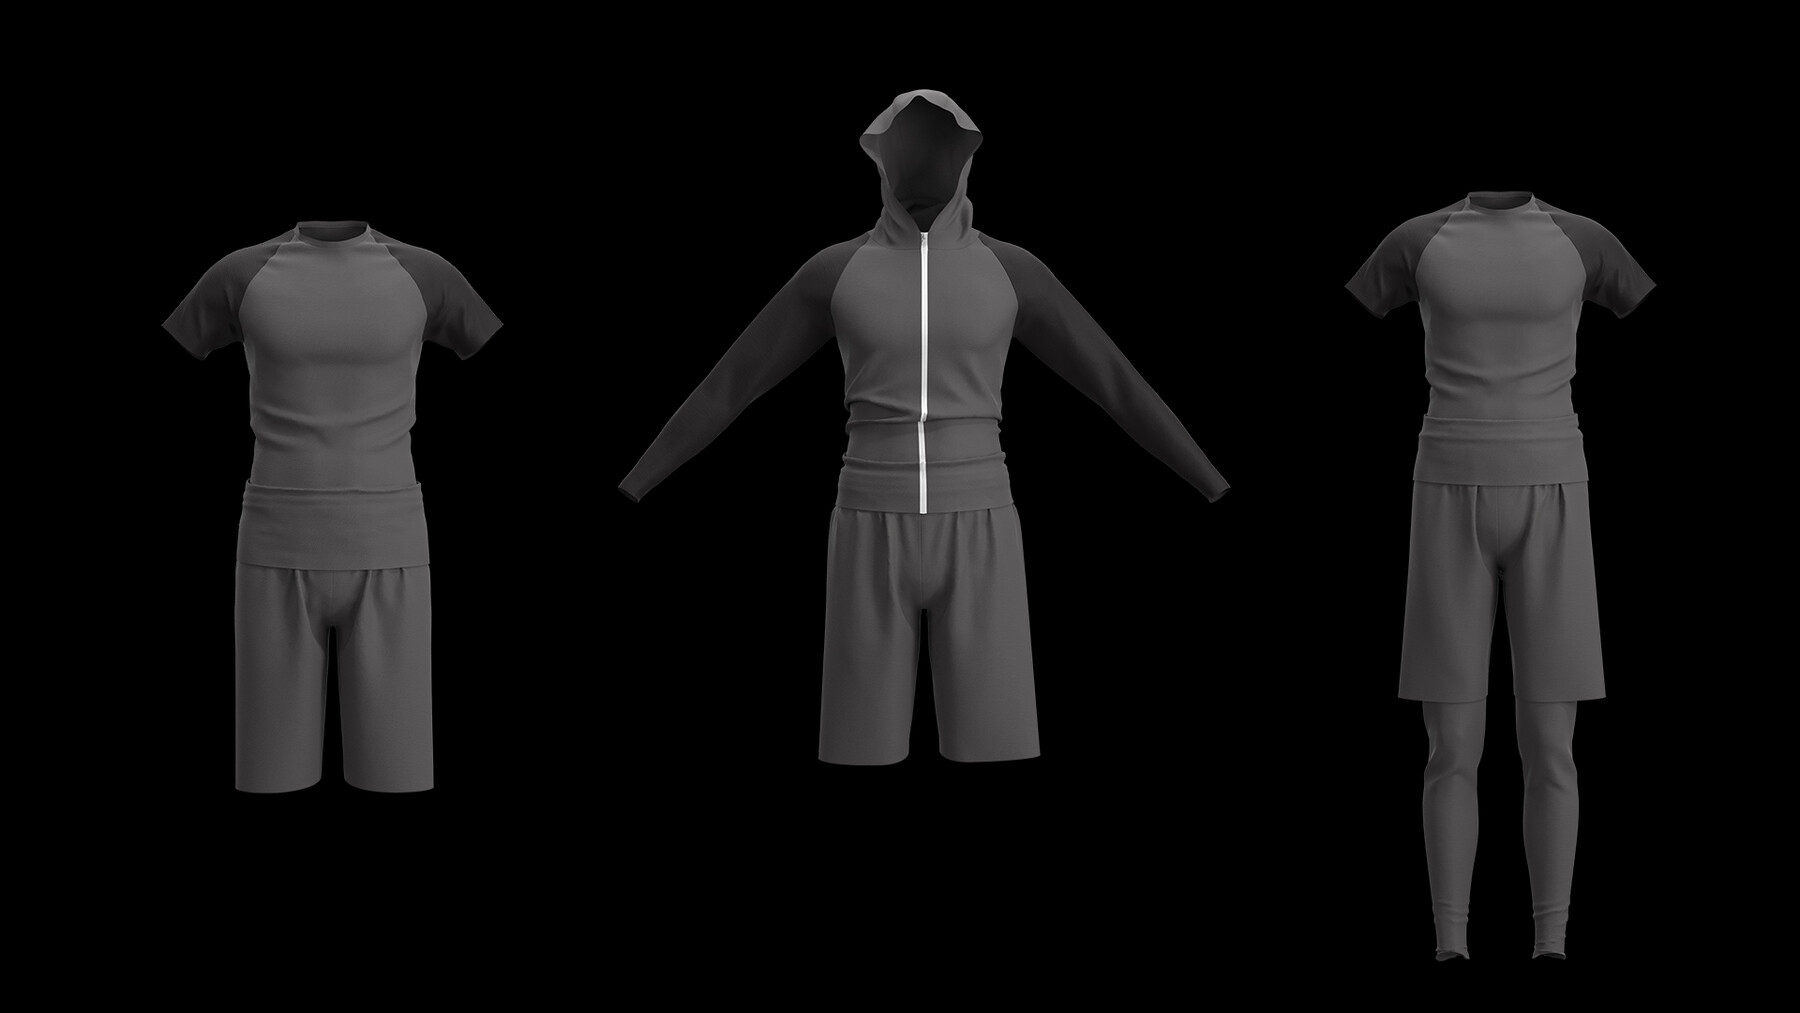 ArtStation - Gym outfit | Game Assets